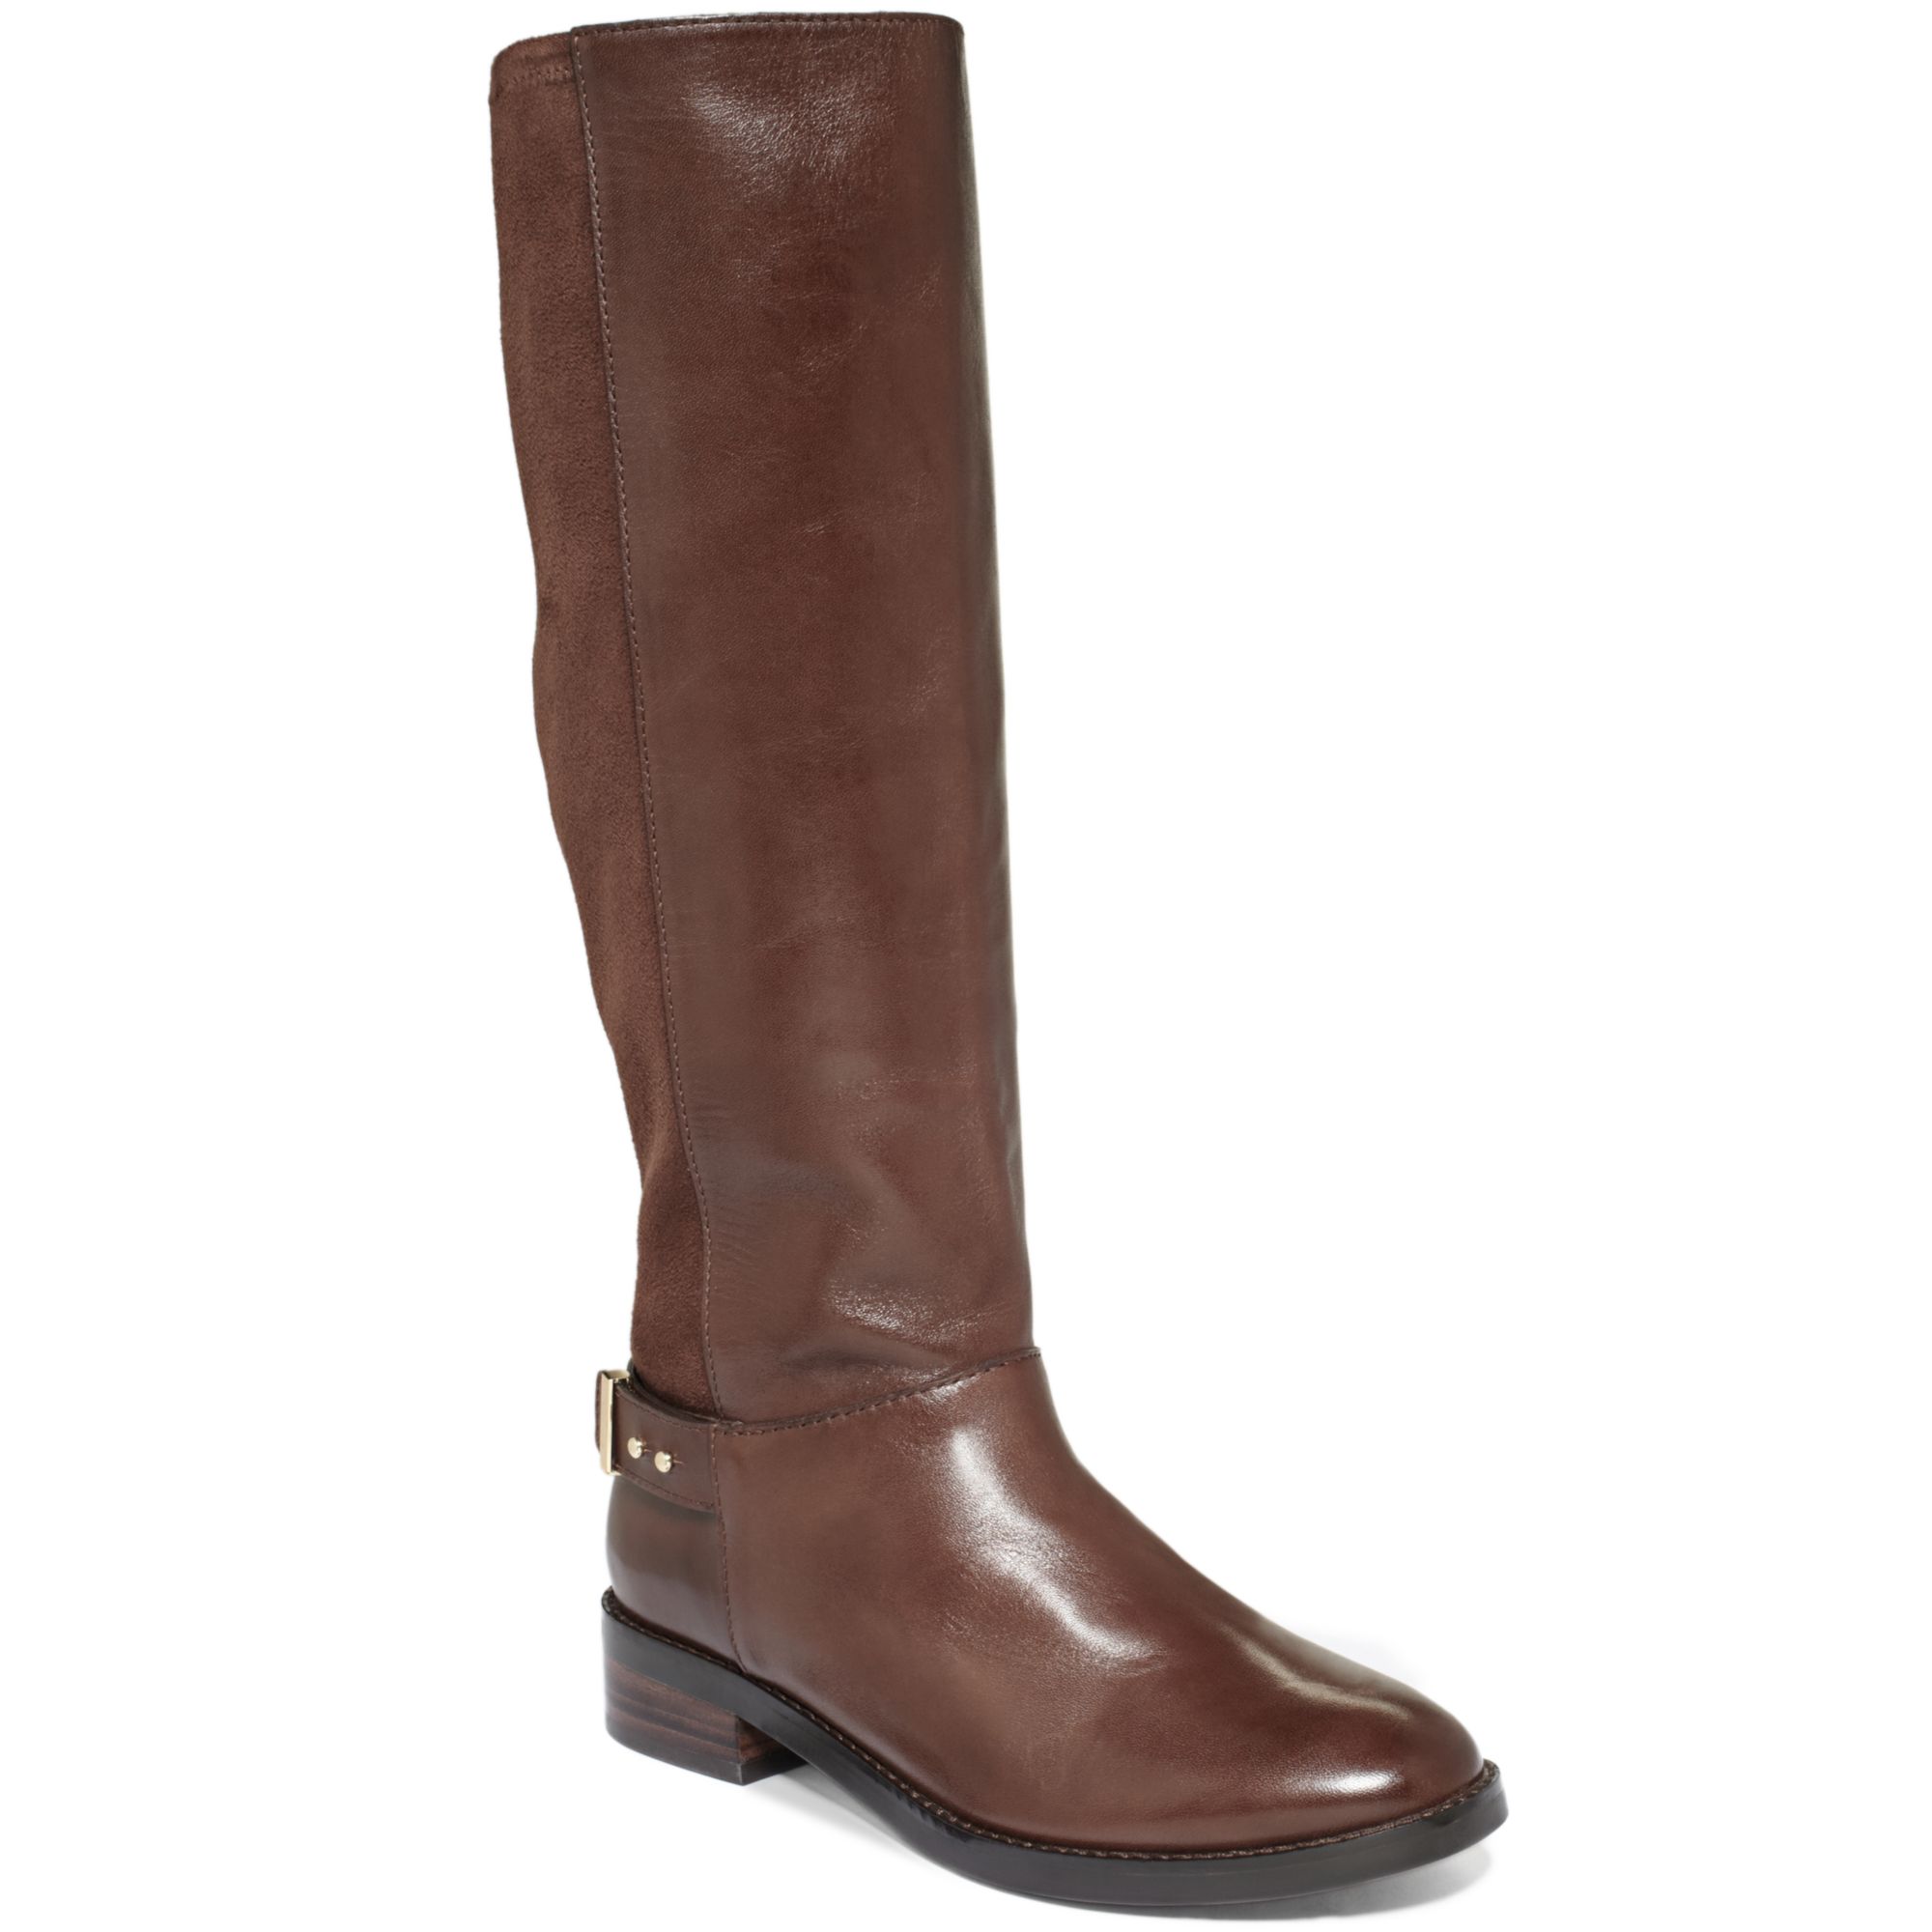 Cole Haan Adler Tall Boots in Chestnut (Brown) - Lyst